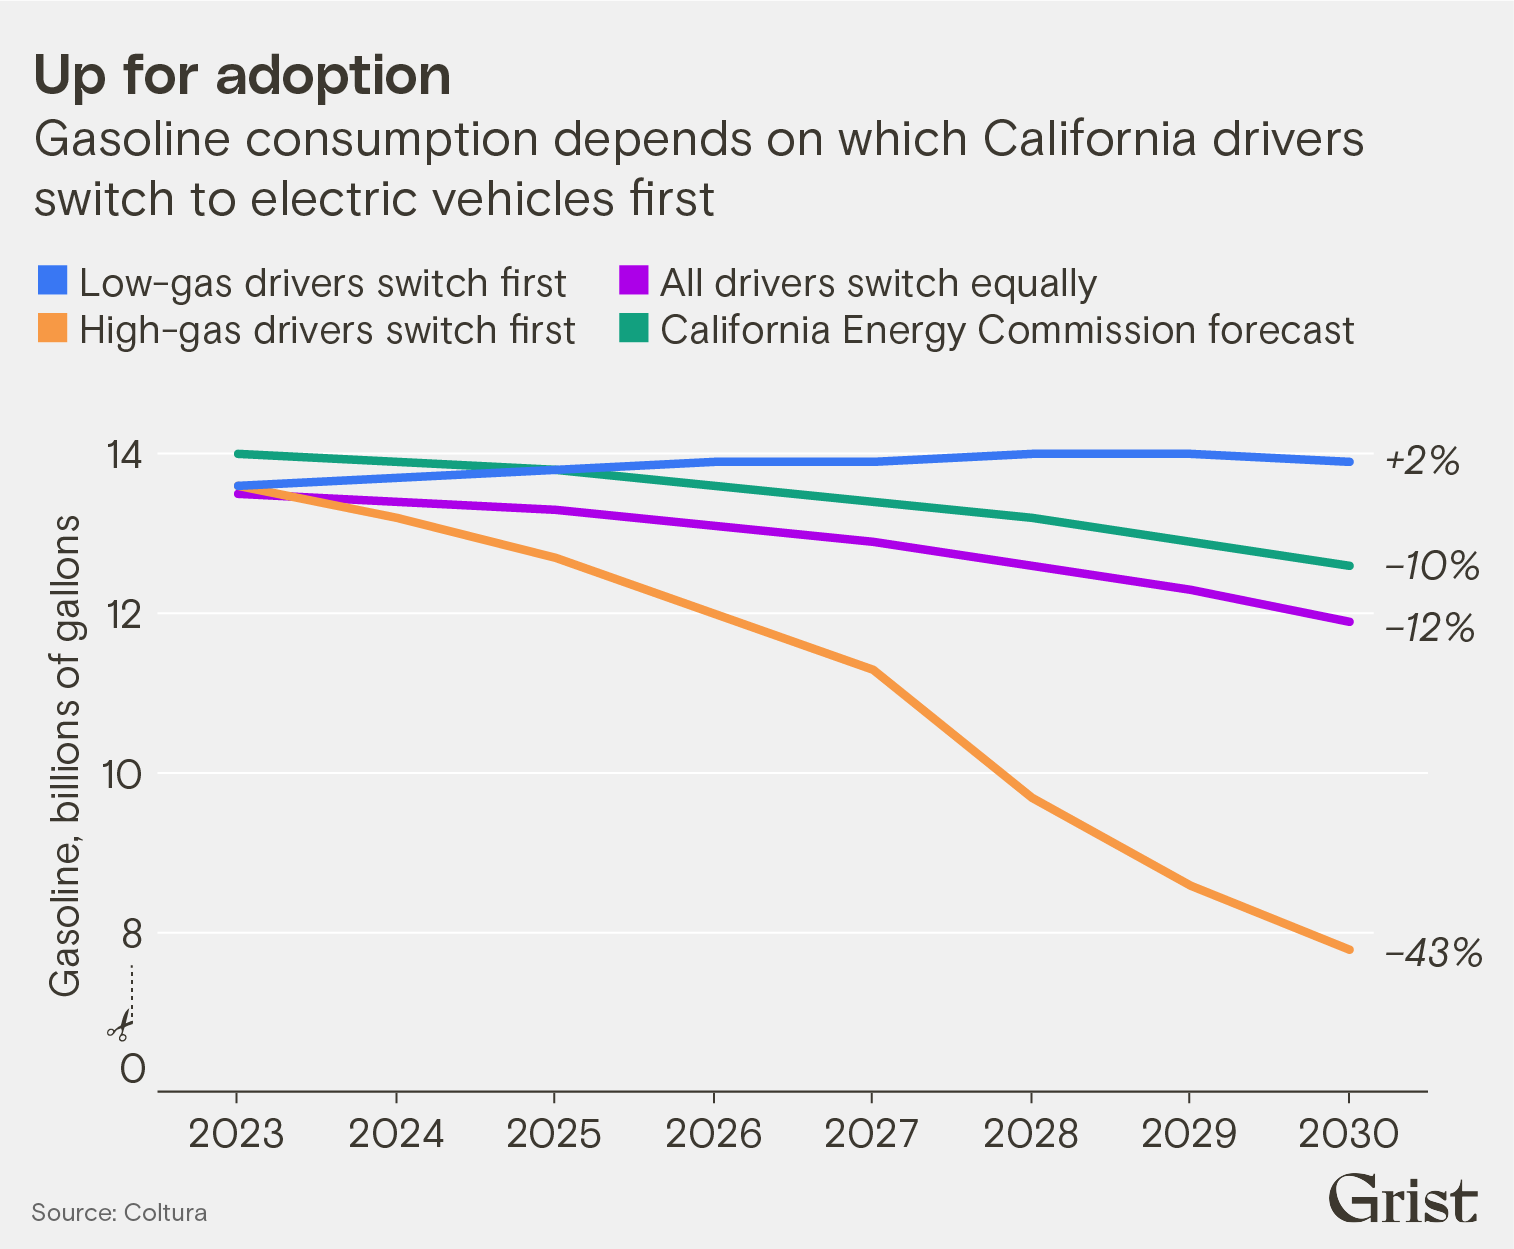 A line chart showing forecasted gasoline consumption over time in California. If high-gas drivers switch to EVs first, gas consumption is forecasted to drop 43 percent by 2030.